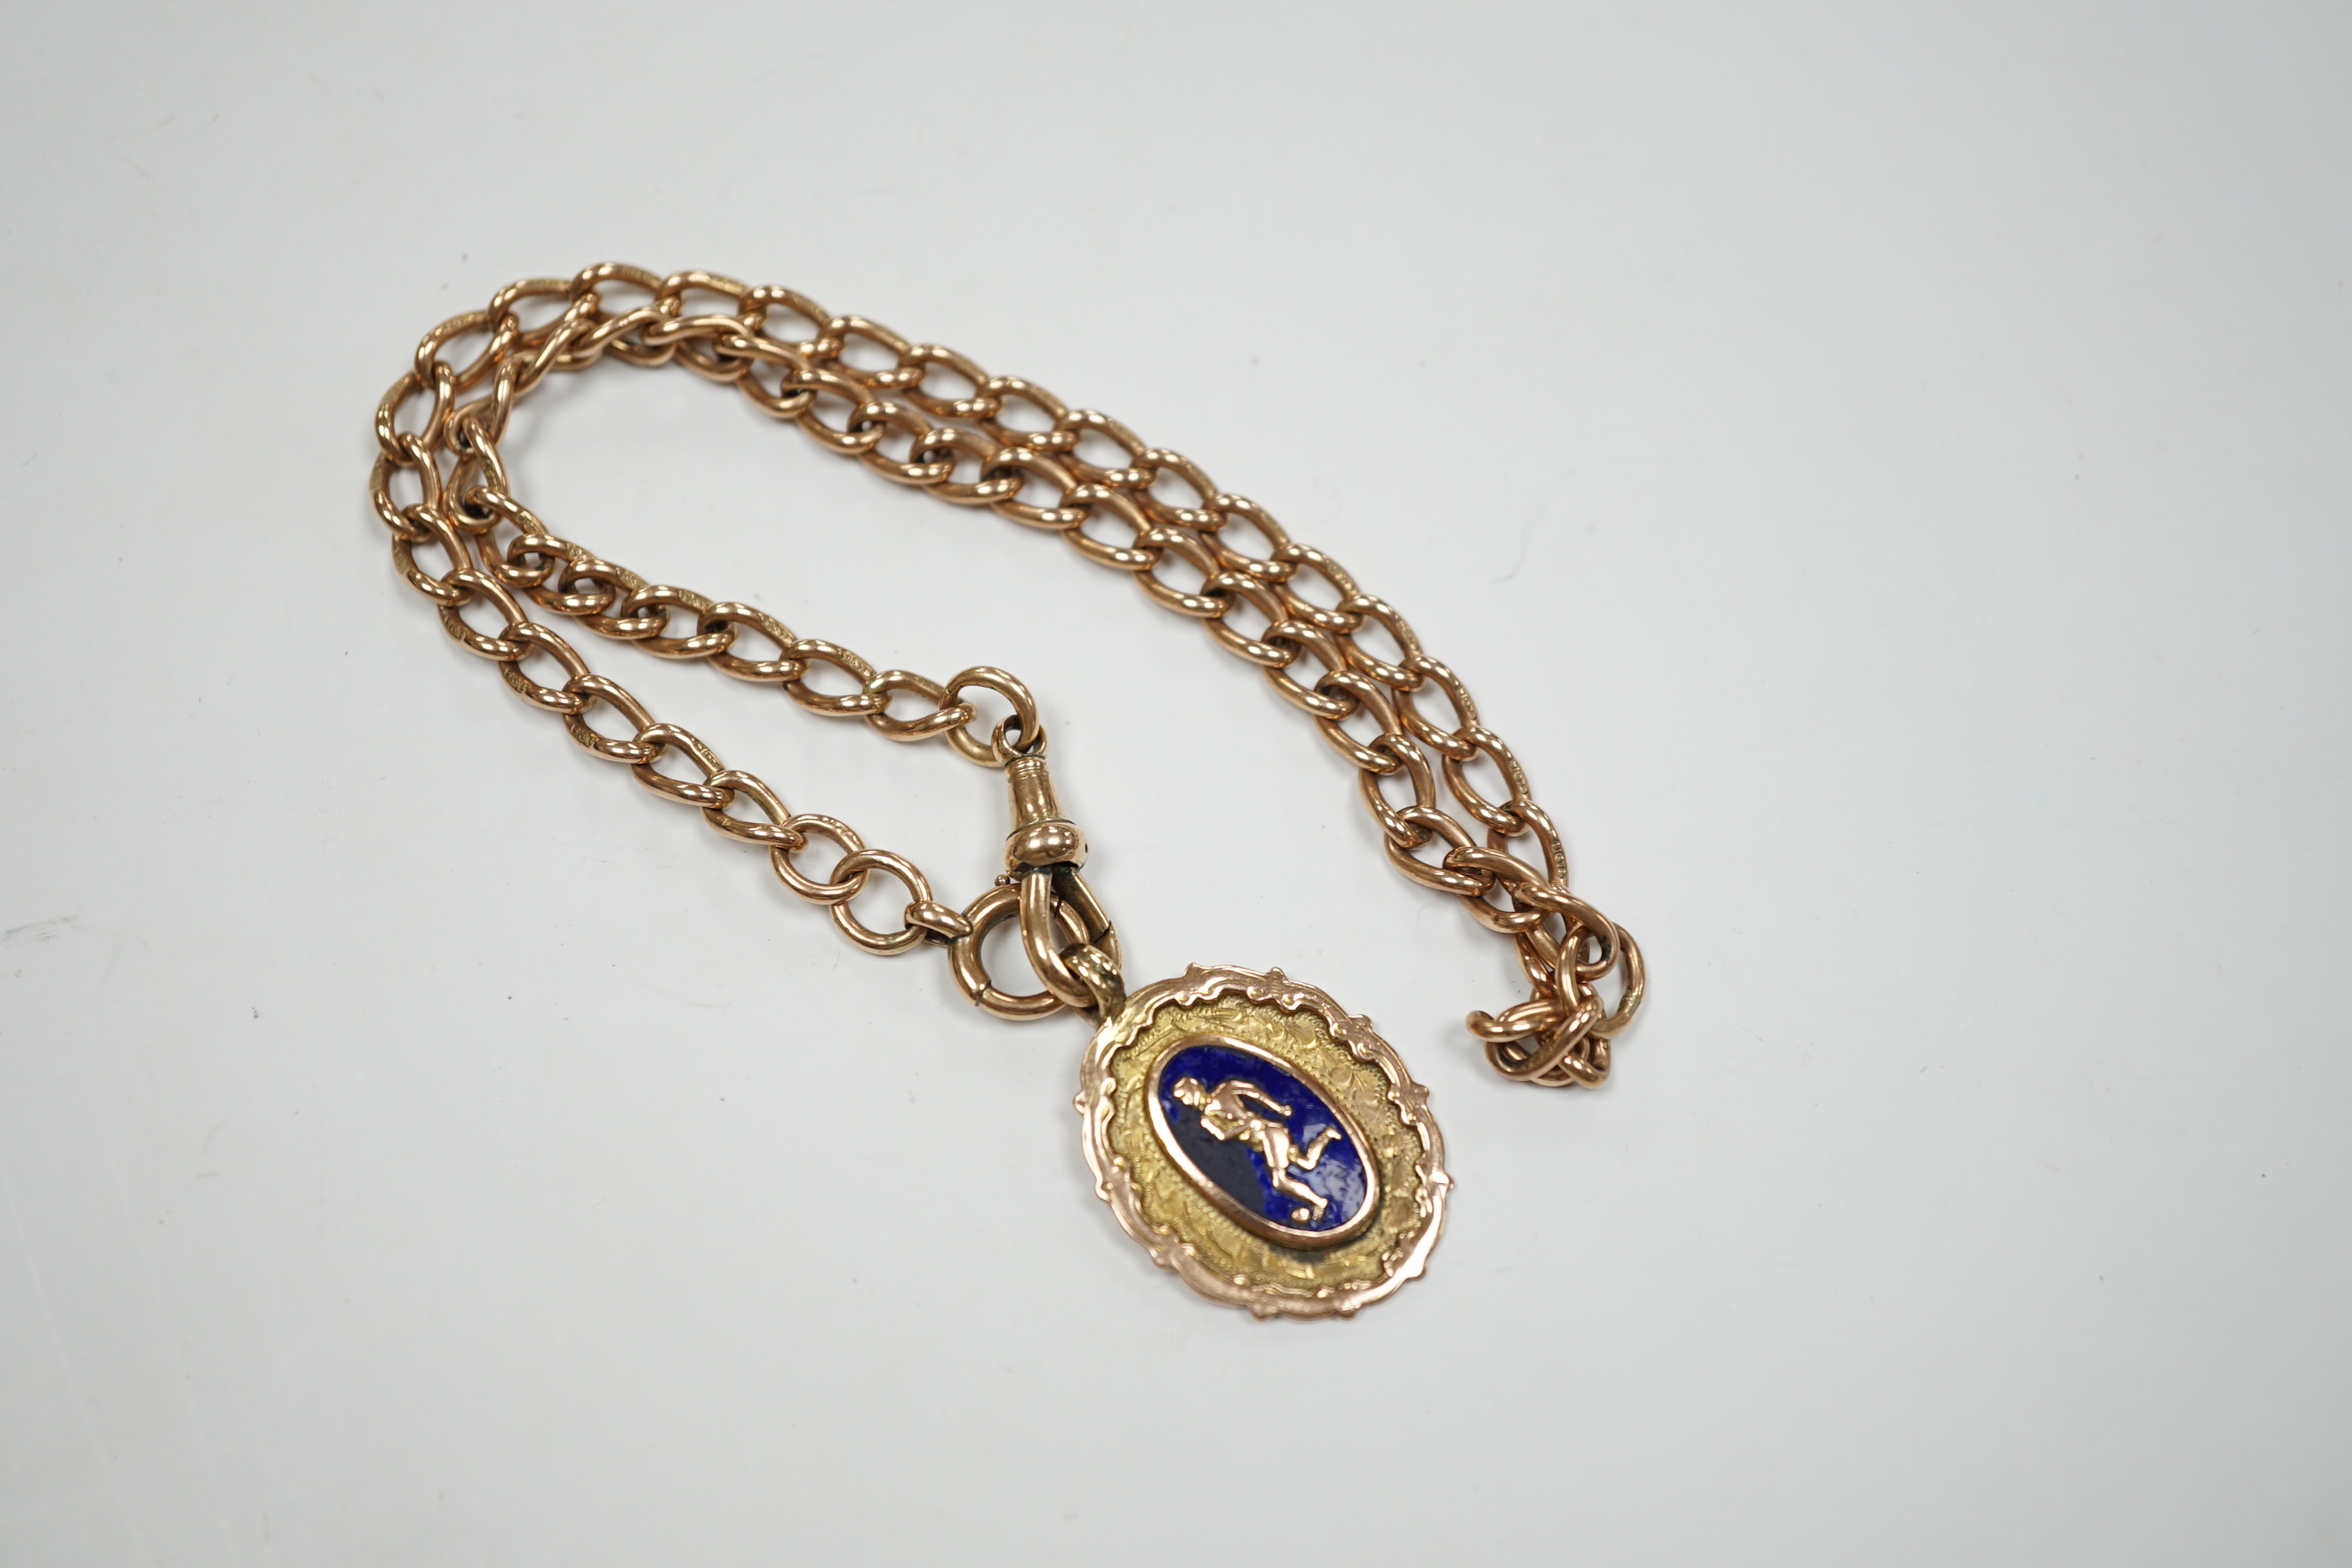 A 9ct gold albert, 38cm, hung with a 9ct gold and enamel football related medal engraved 'L .&. D F.A. Runners Up 1928-9', gross weight 28.9 grams.